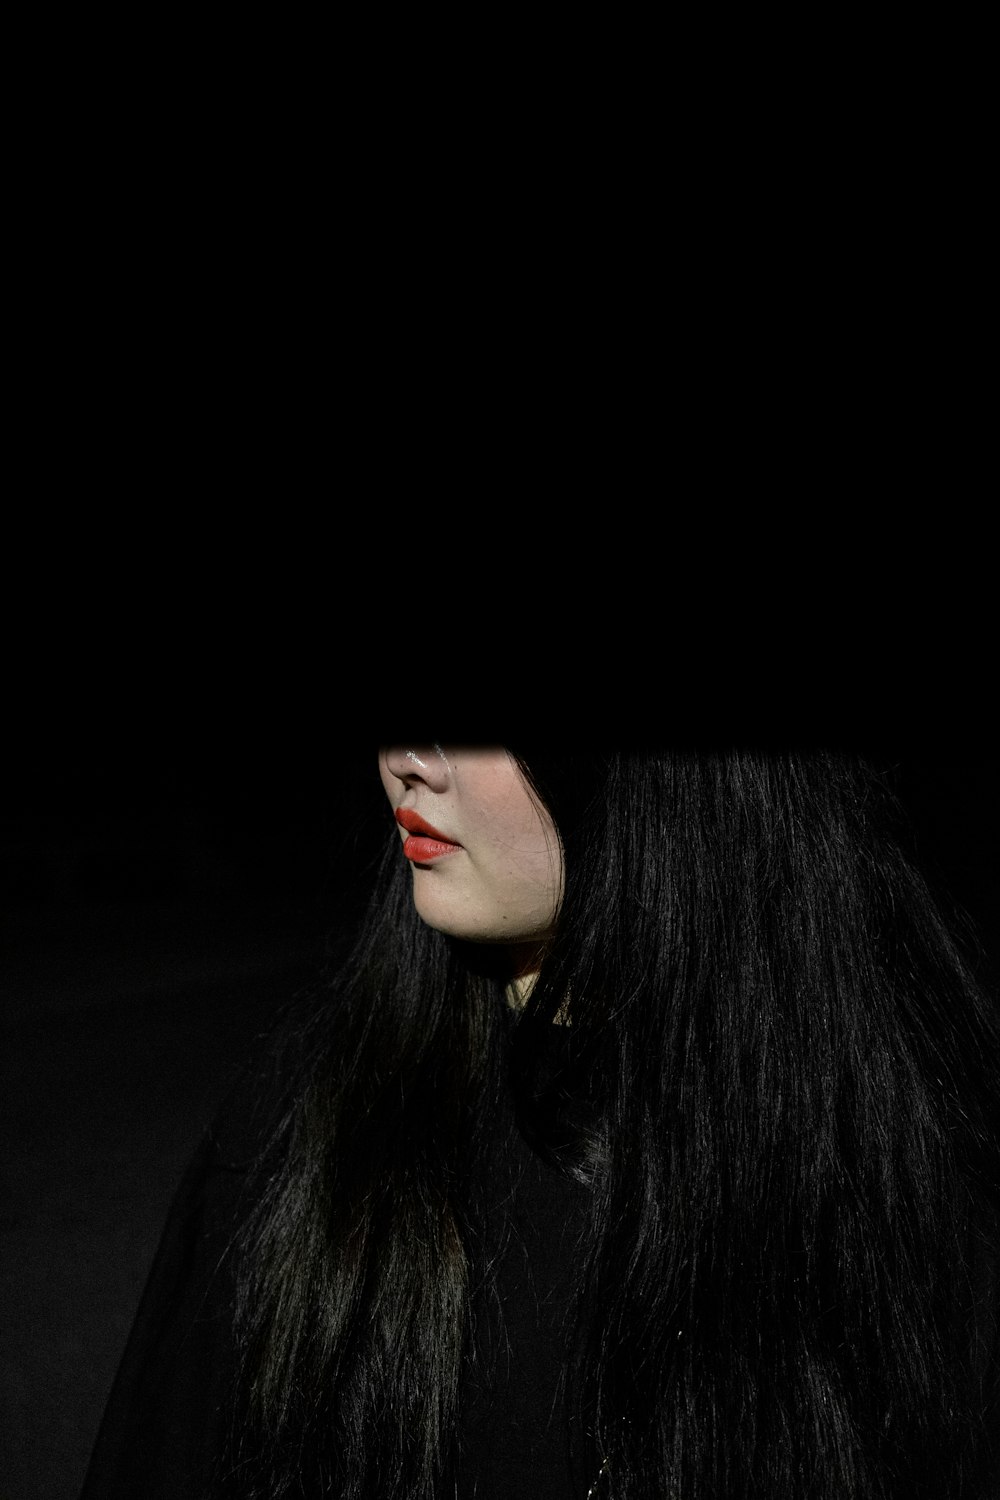 a woman with long black hair and red lipstick